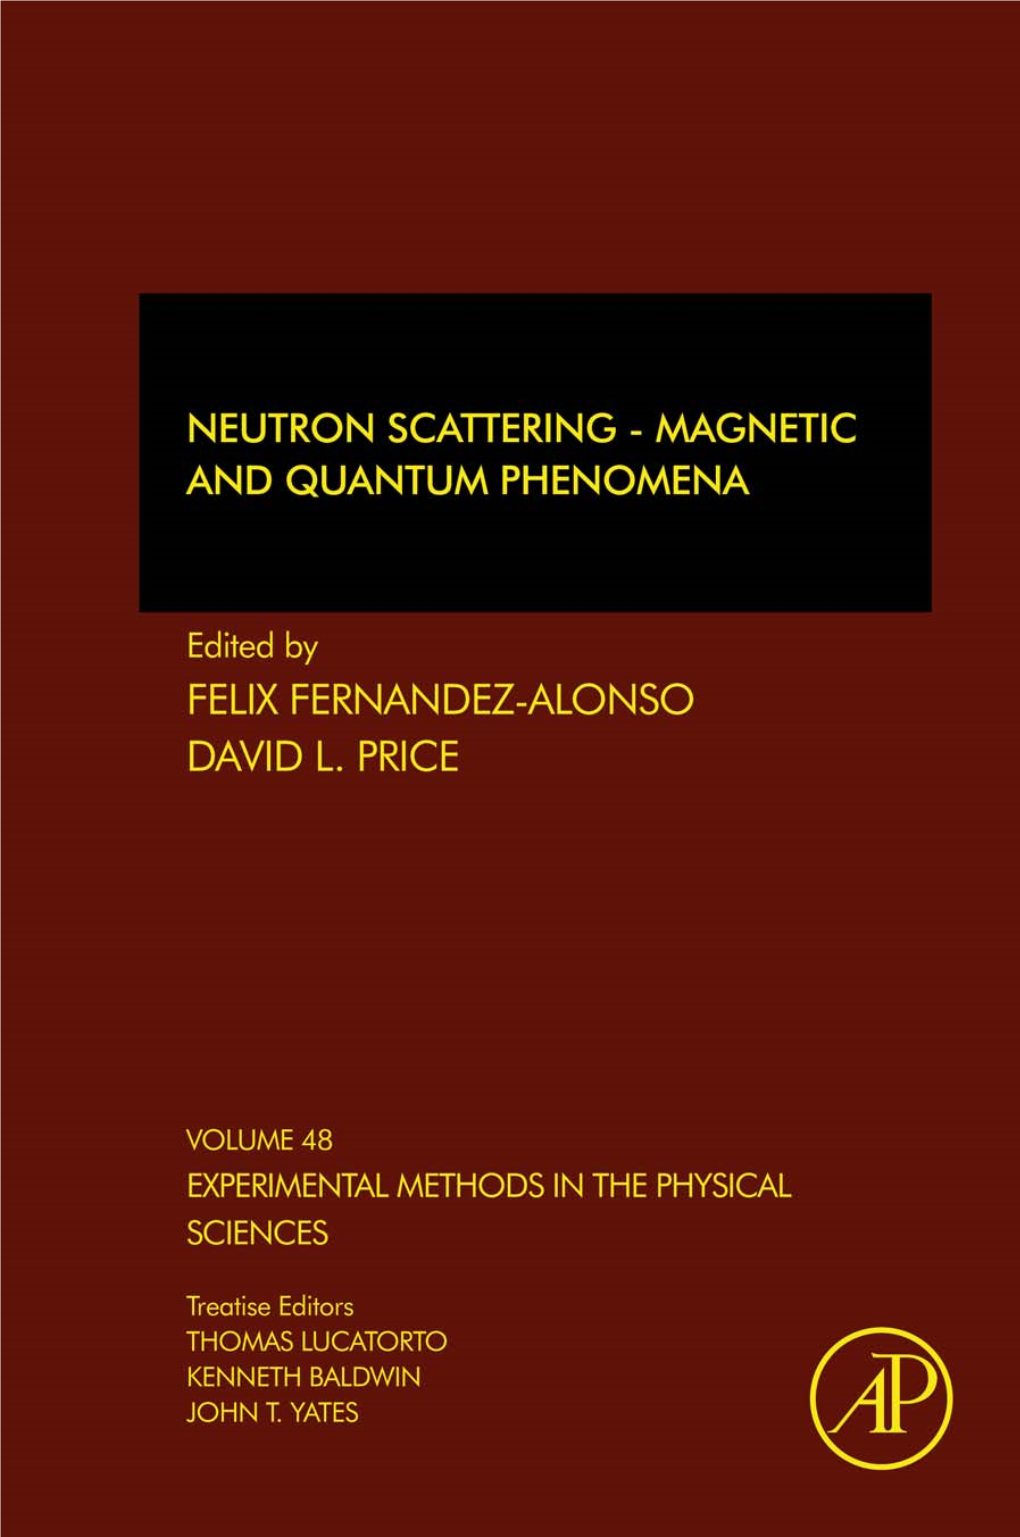 Neutron Scattering - Magnetic and Quantum Phenomena Experimental Methods in the Physical Sciences